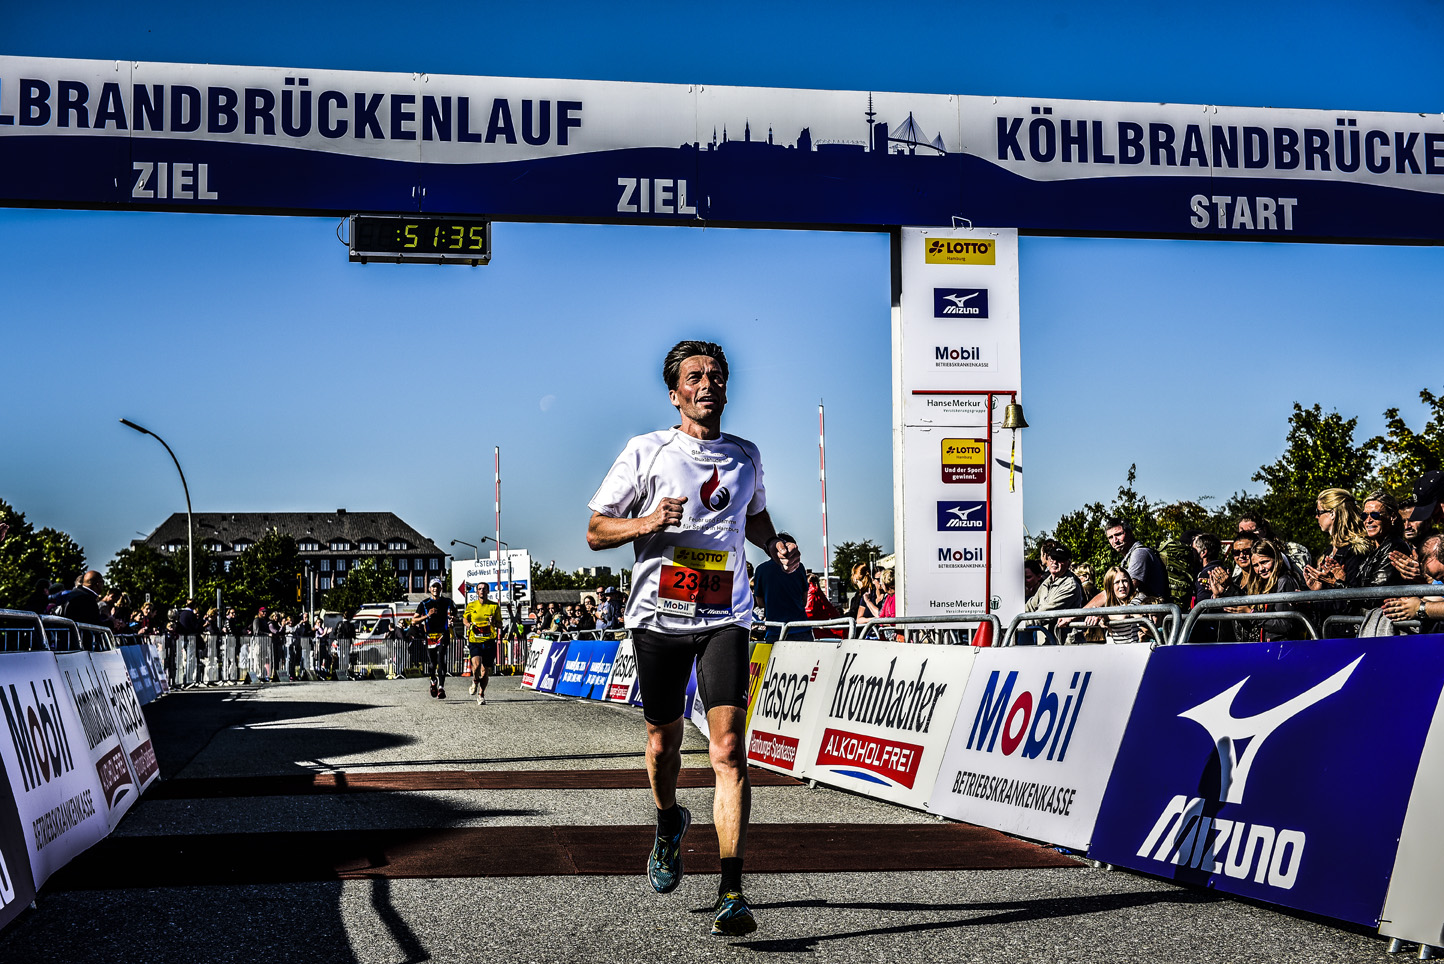 Eure Finisher-Clips sind online!